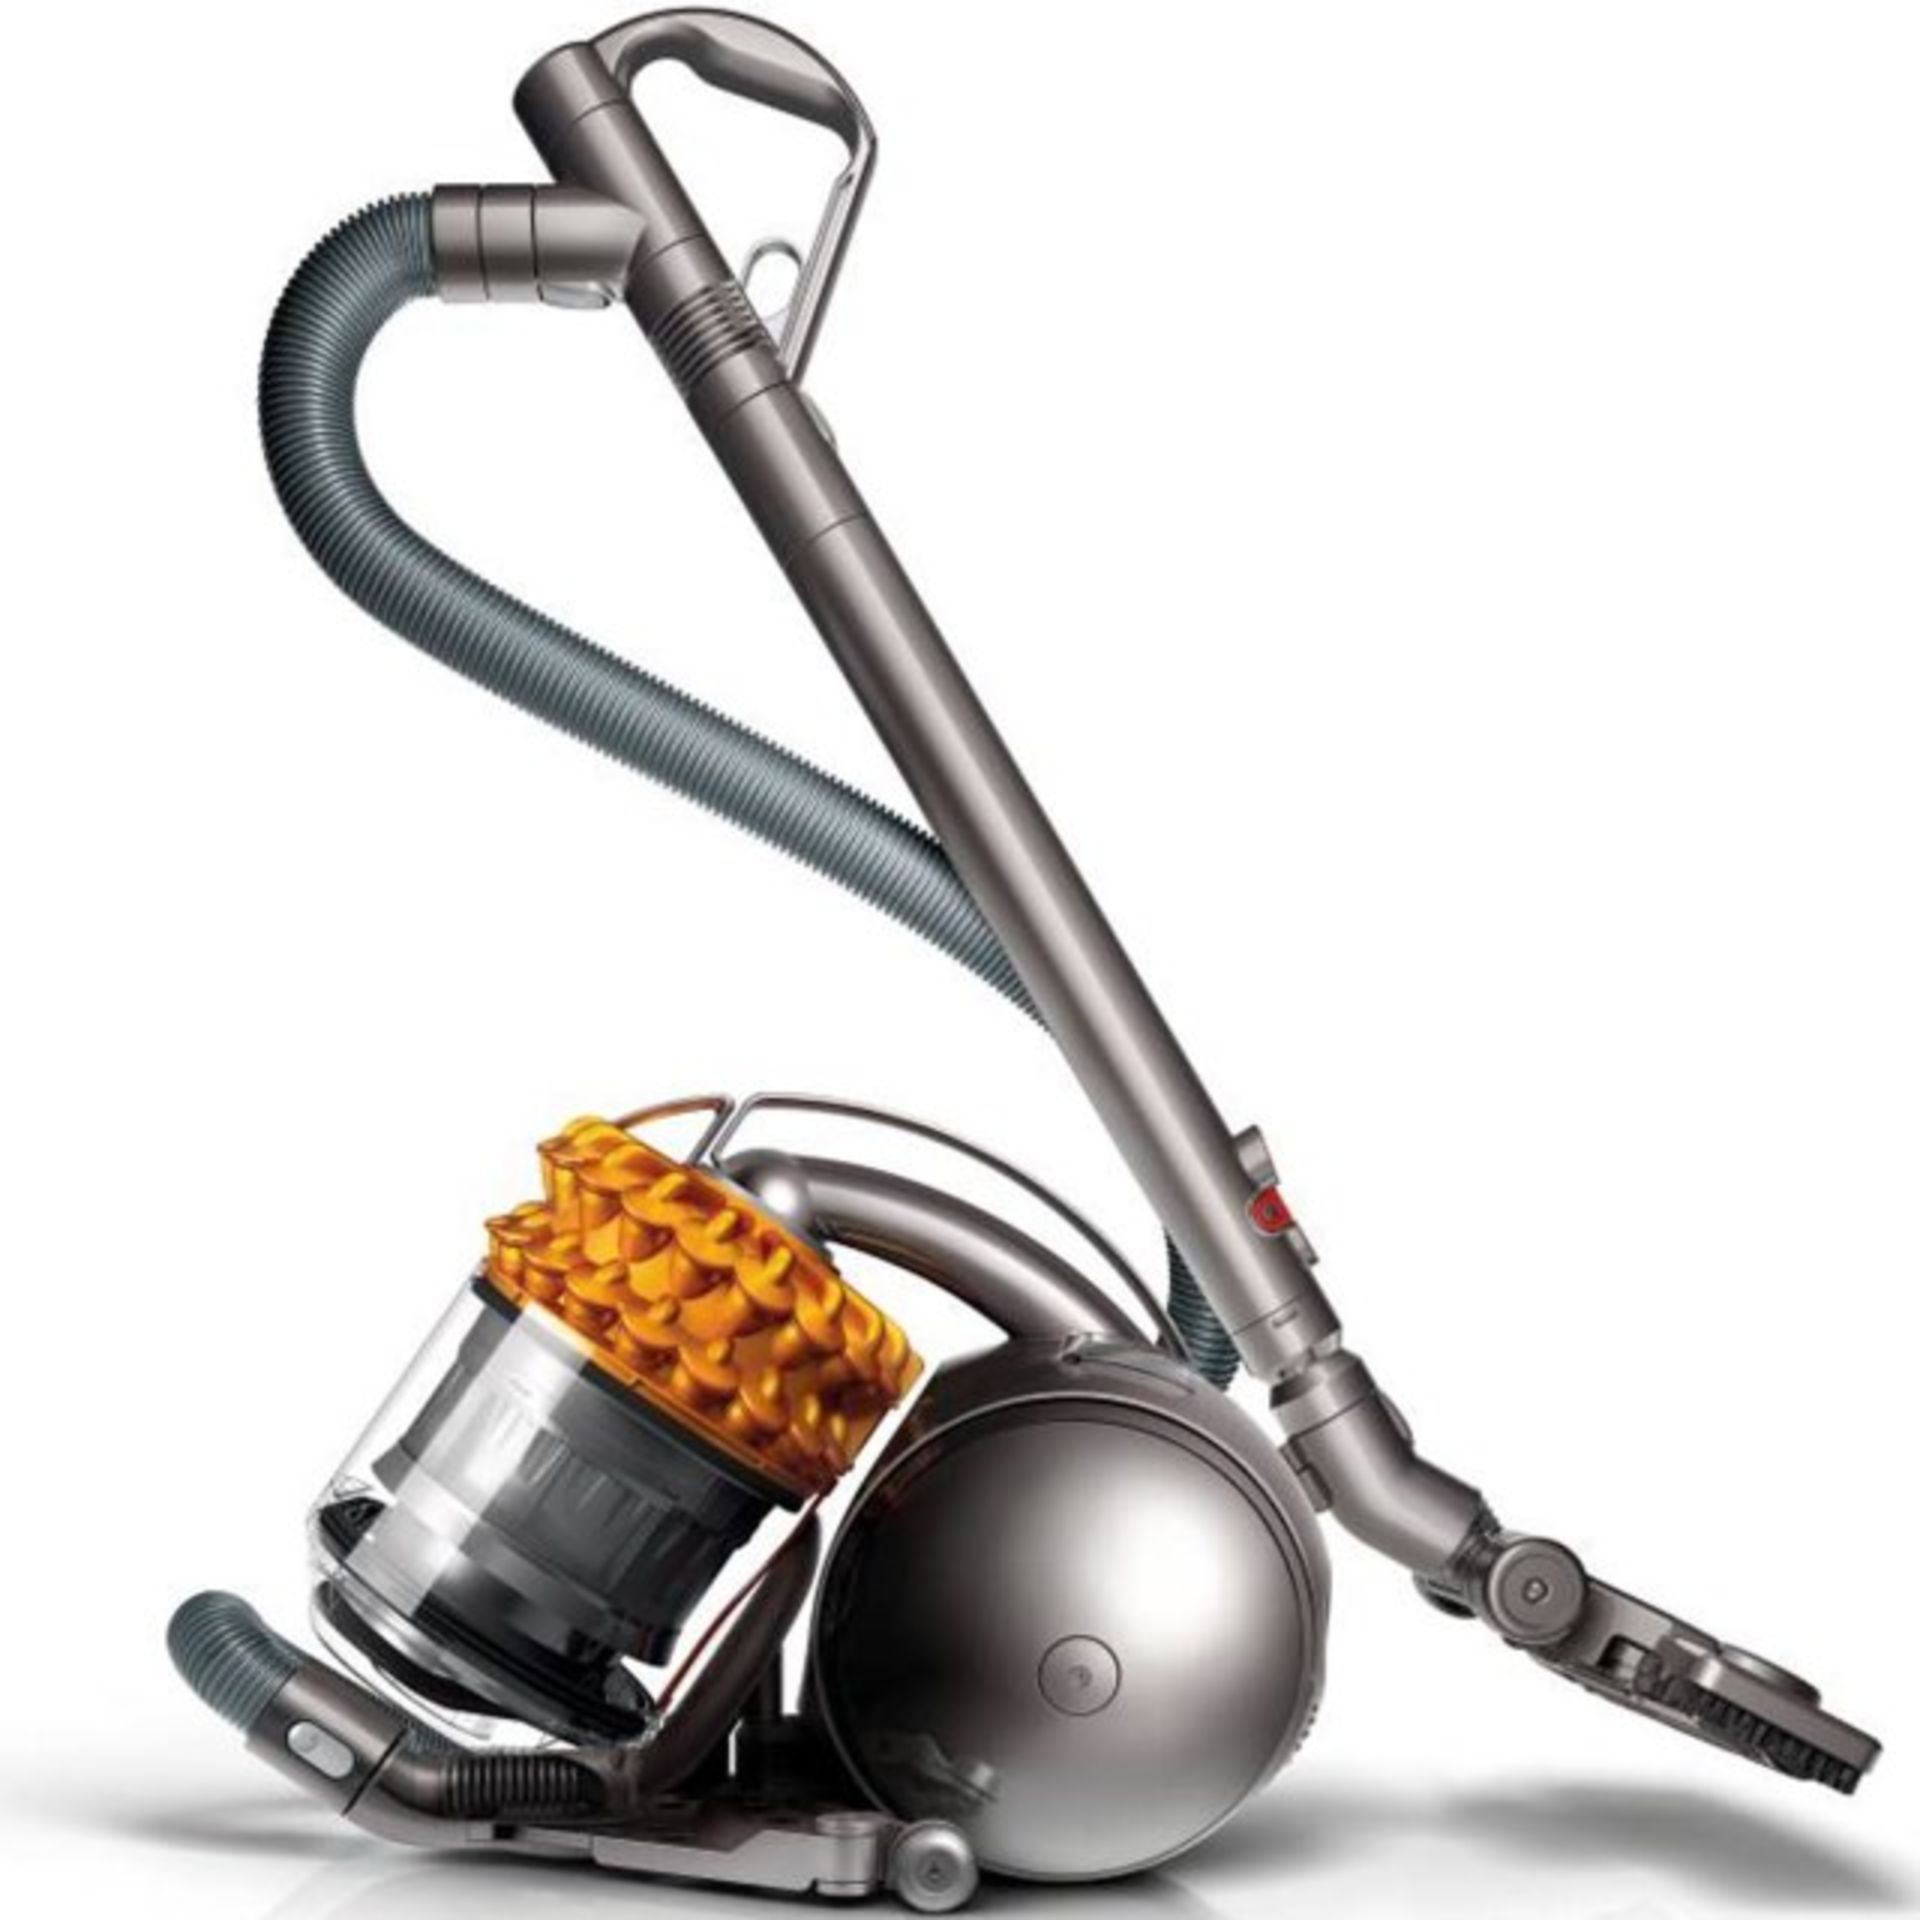 V Brand New Brand New Dyson DC54 Multi Floor Bagless Vacuum Cleaner RRP: £359.99 (Item Has 5 Year